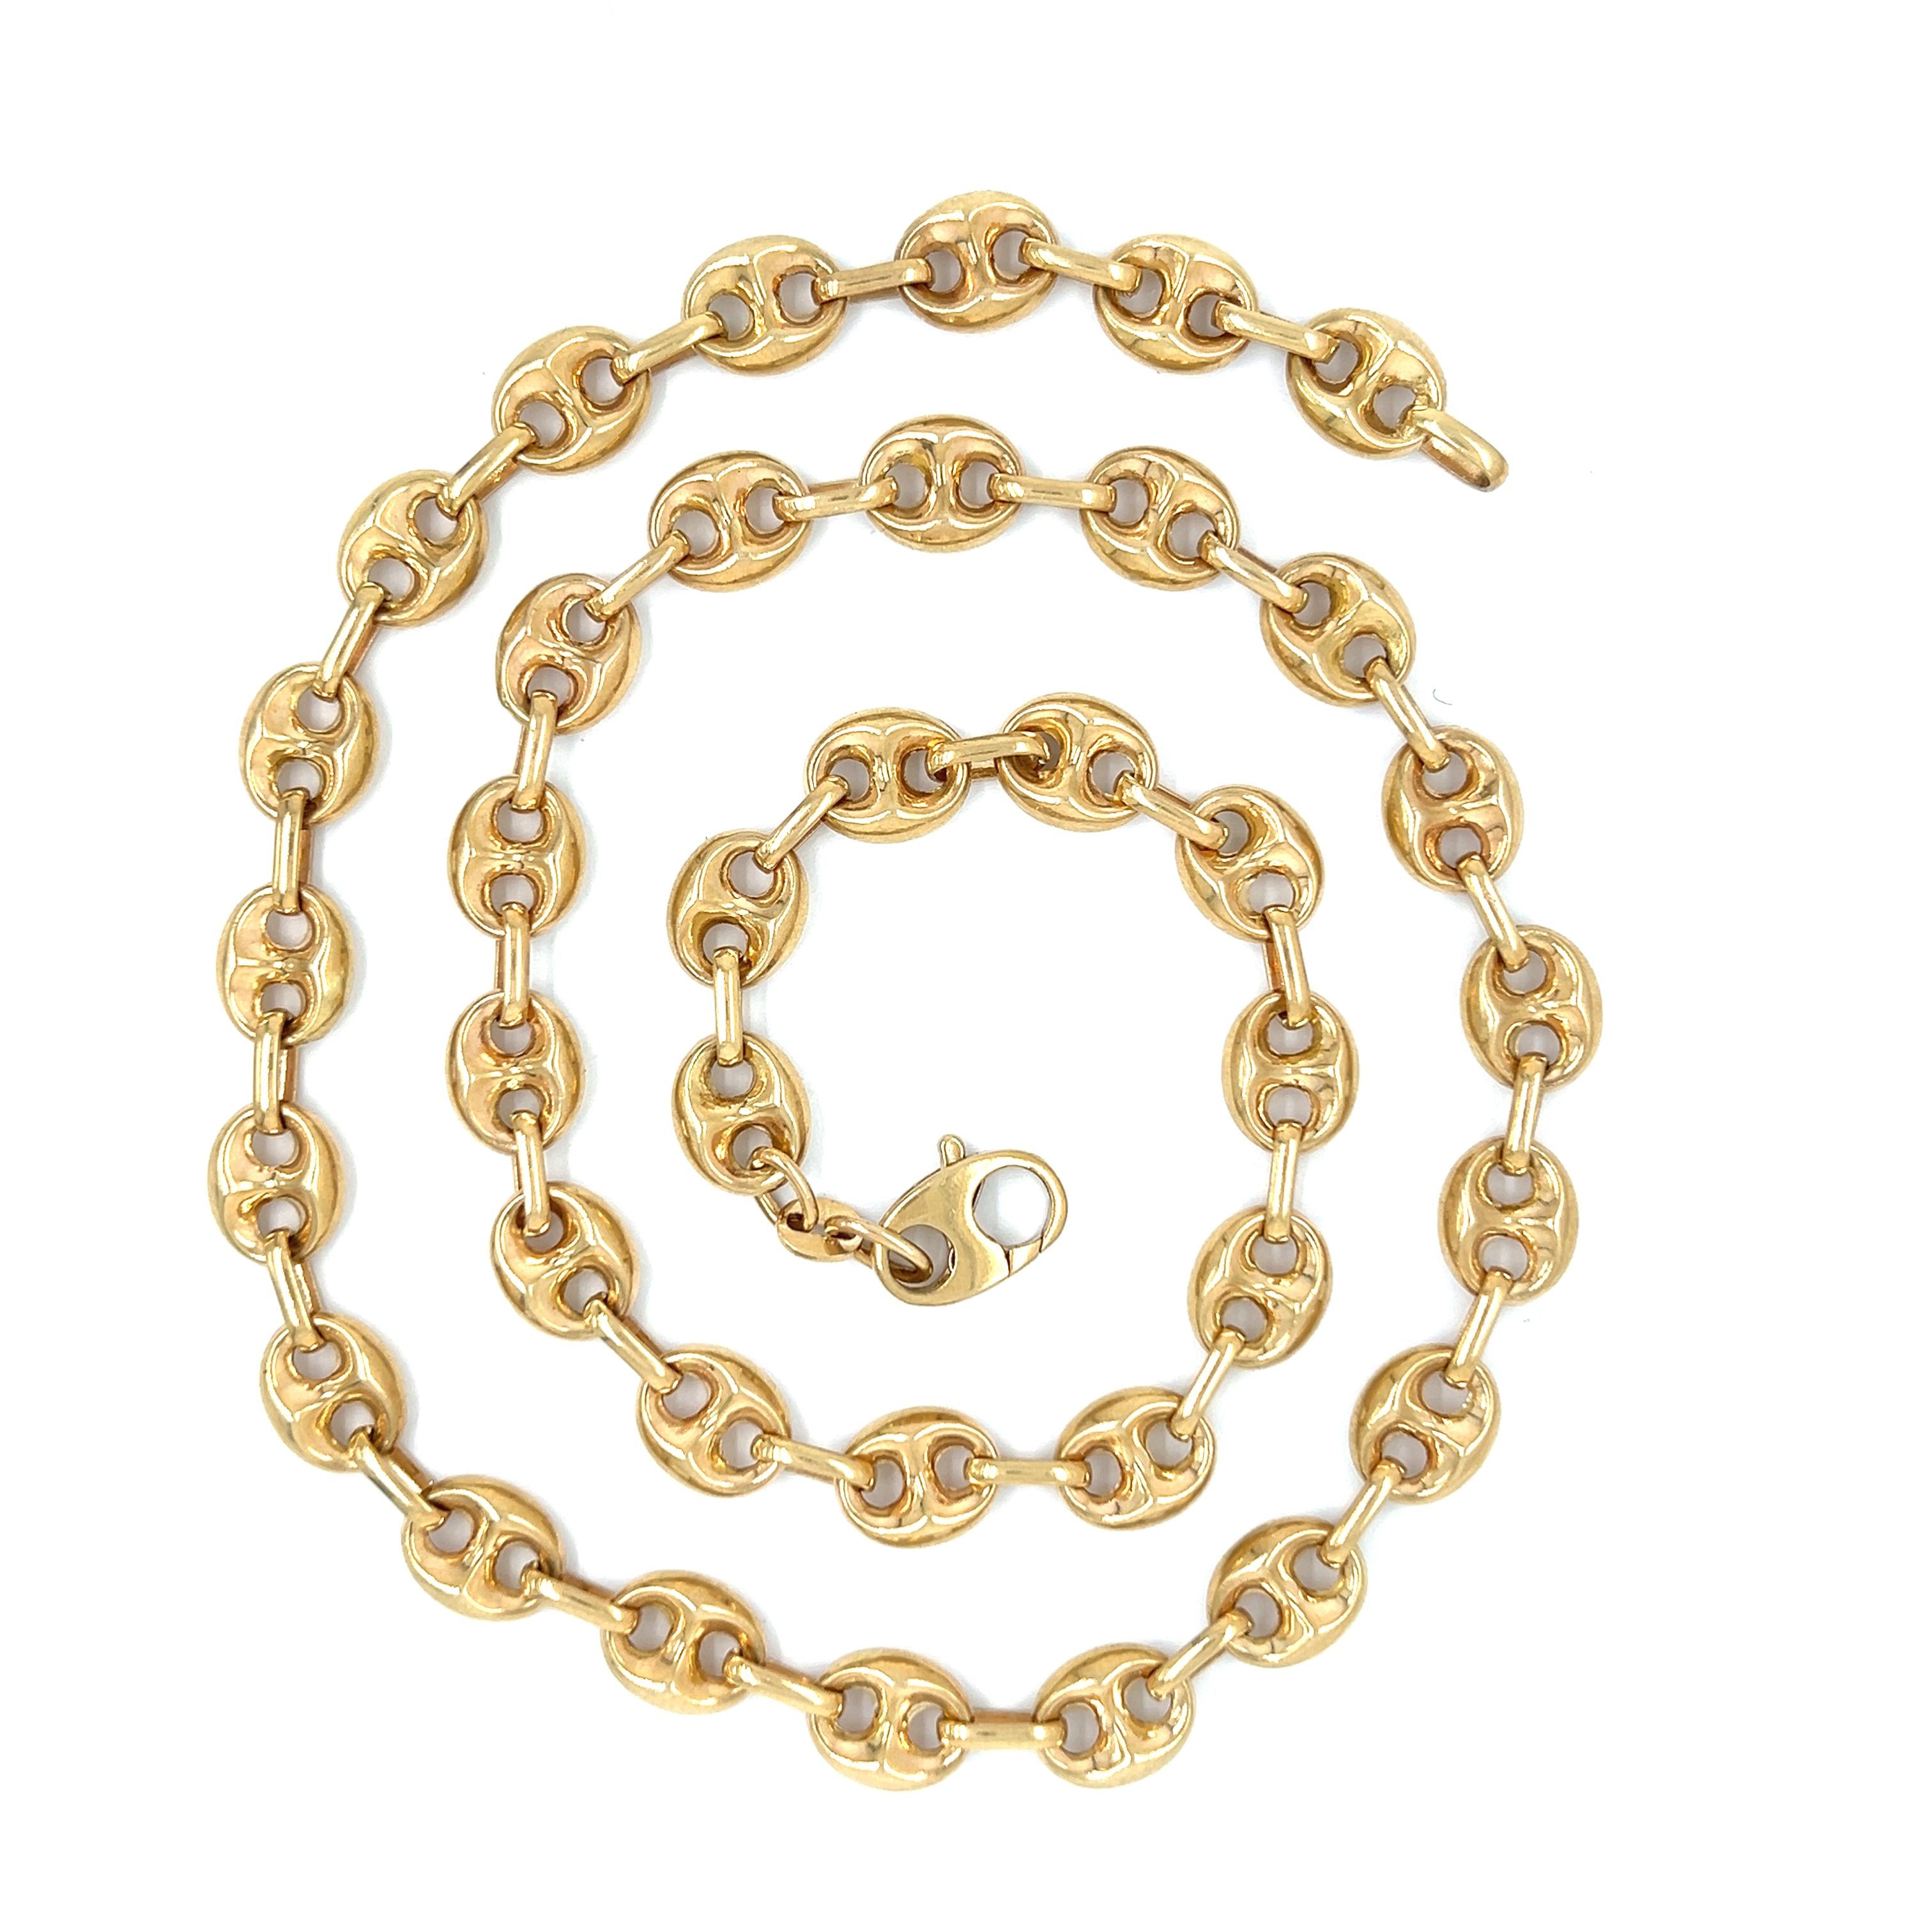 Vintage Puffed Mariner-Linked 14k Gold Chain 20.5"